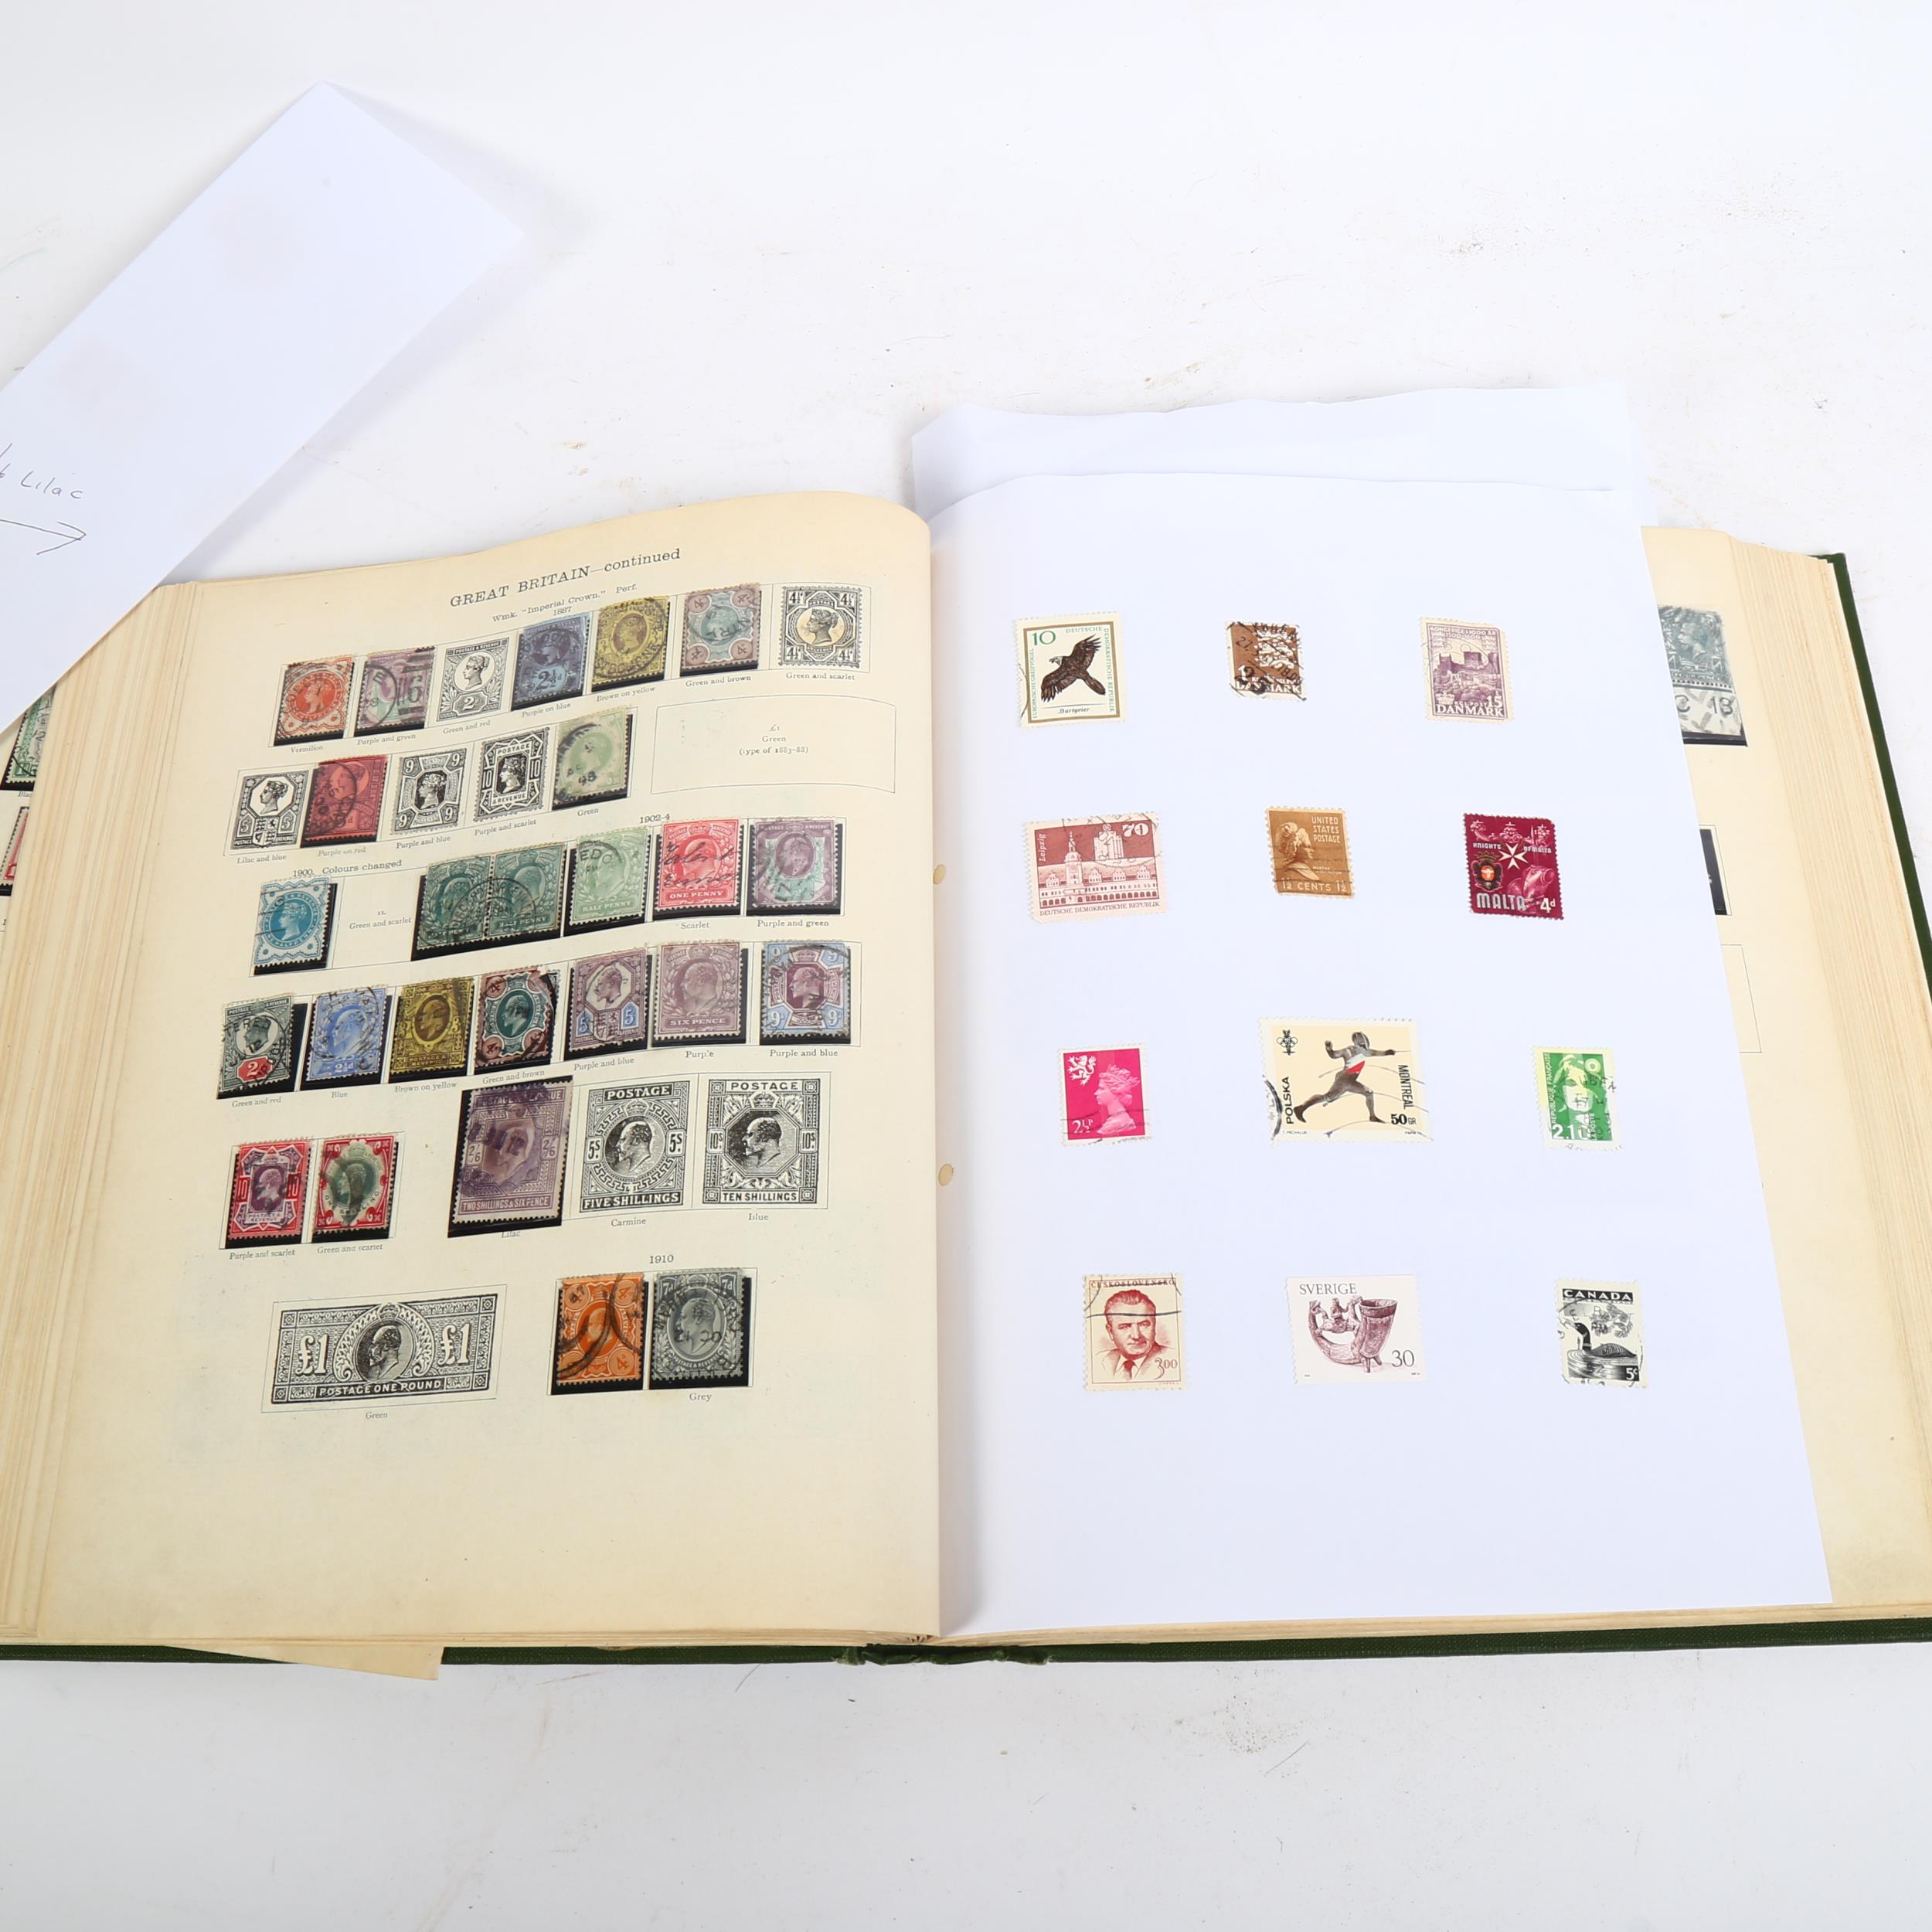 A new Ideal postage stamp album, containing Commonwealth and worldwide stamps, including the - Image 2 of 2